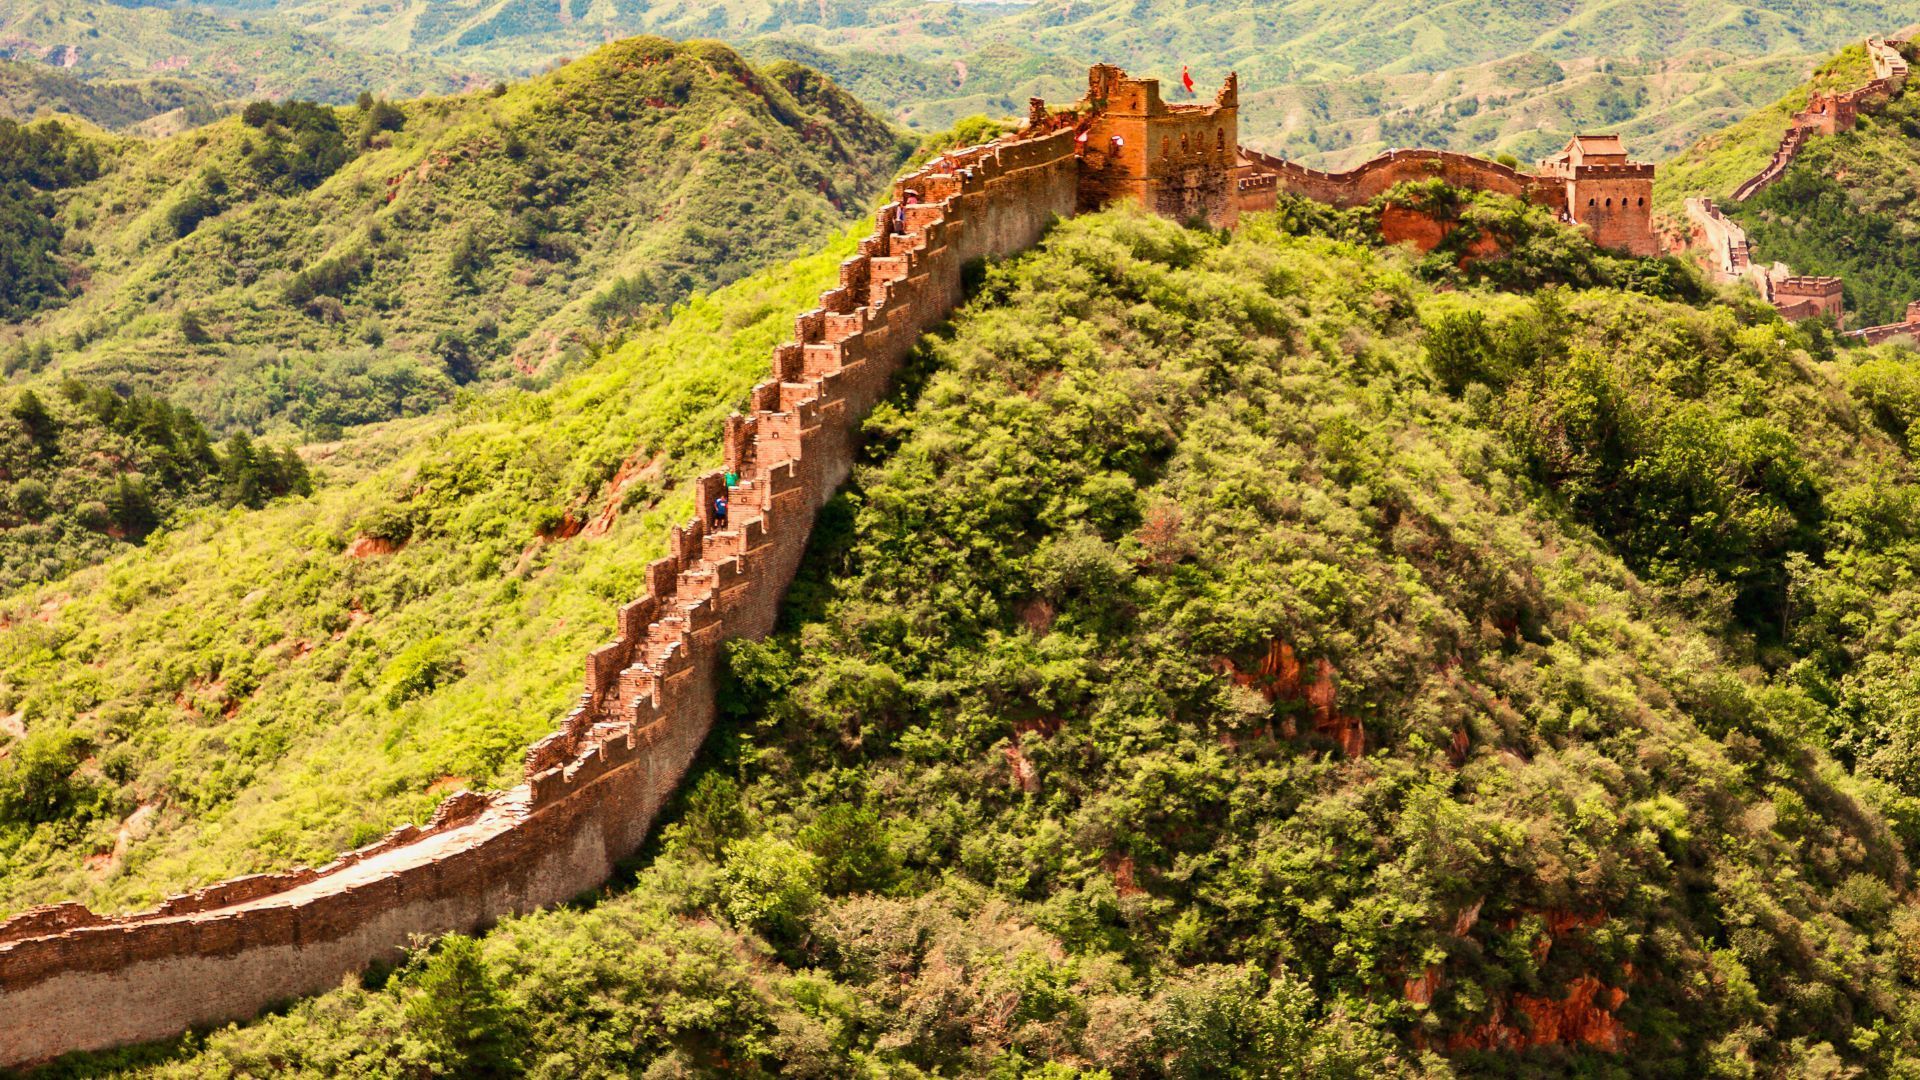 Chinese wall in the morning light - a Royalty Free Stock Photo